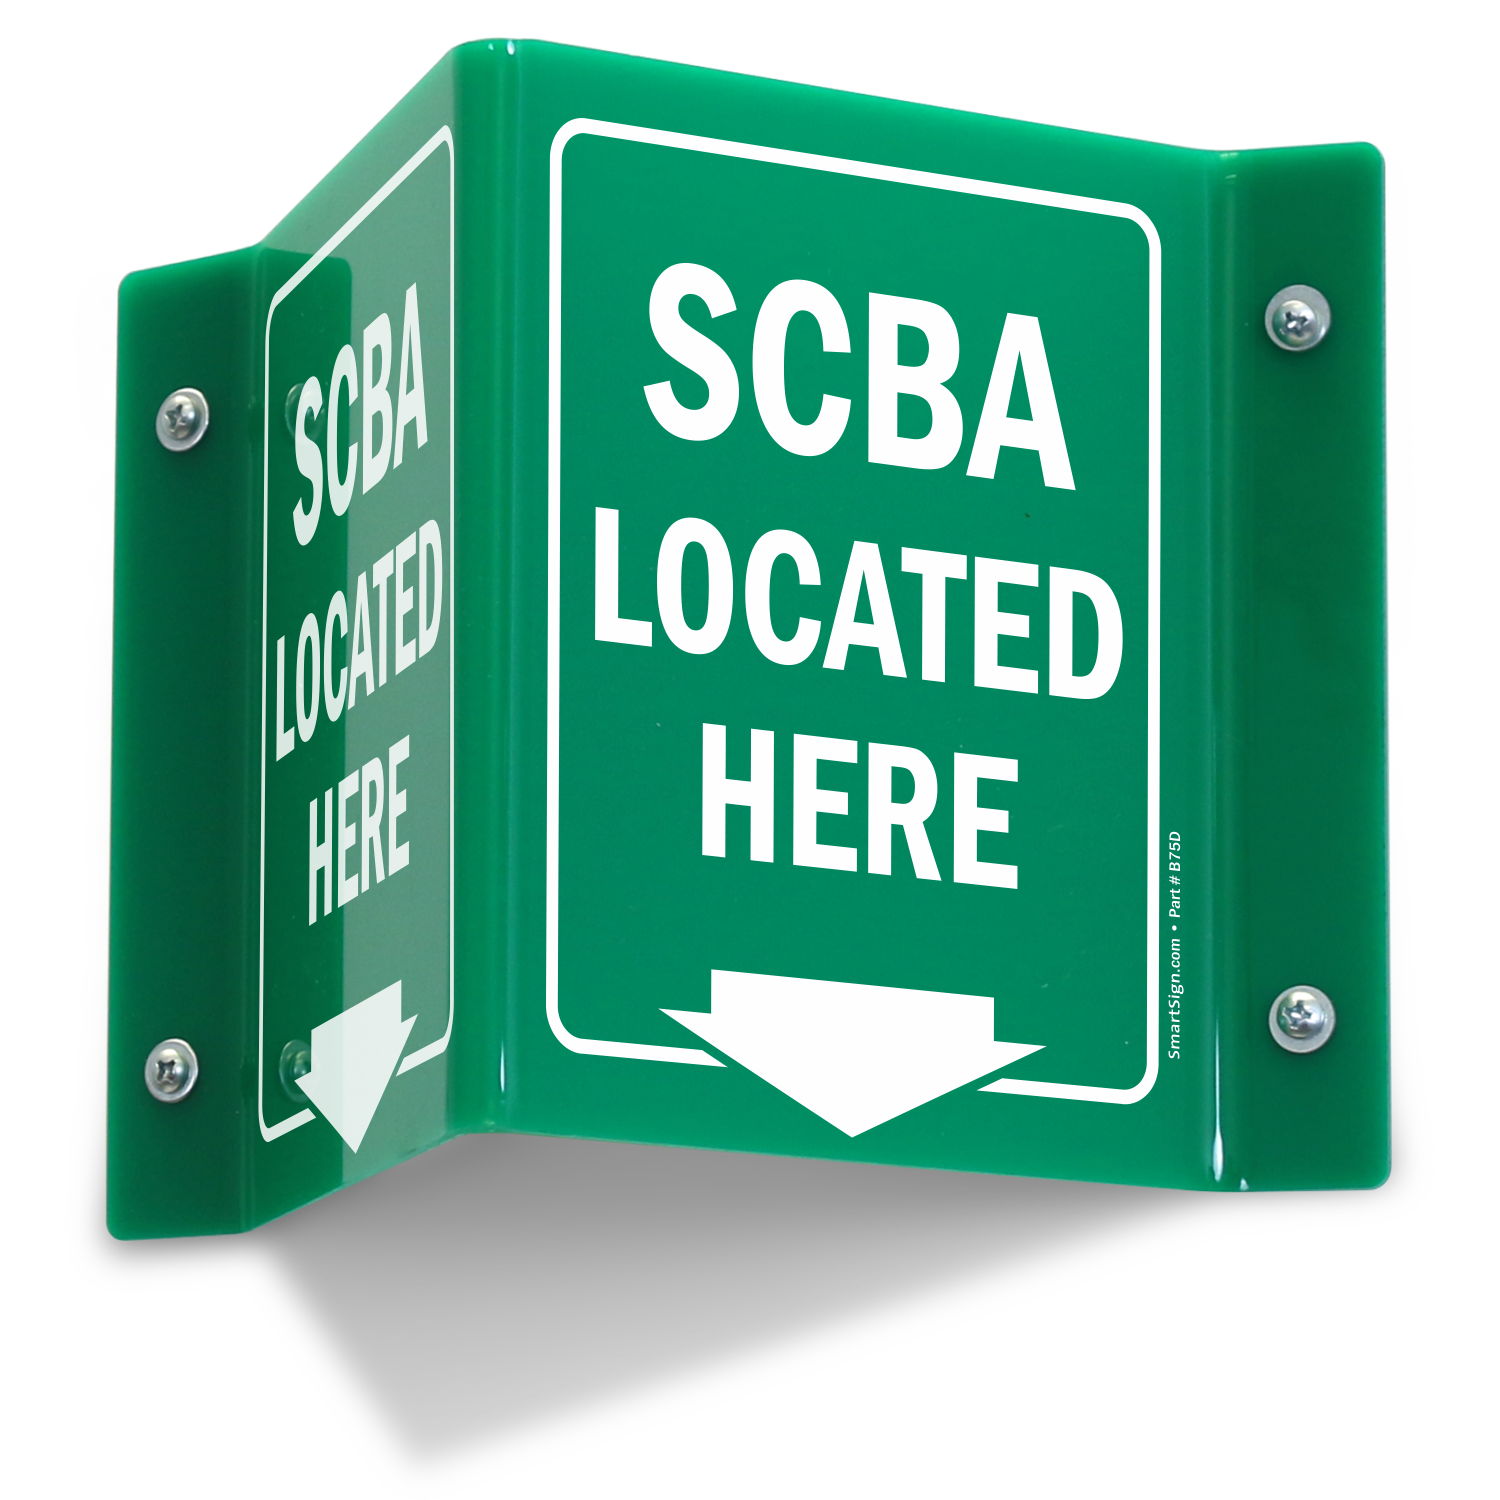 SCBA Located Here - 2-Sided Projecting Sign, SKU: S-9403 - MySafetySign.com